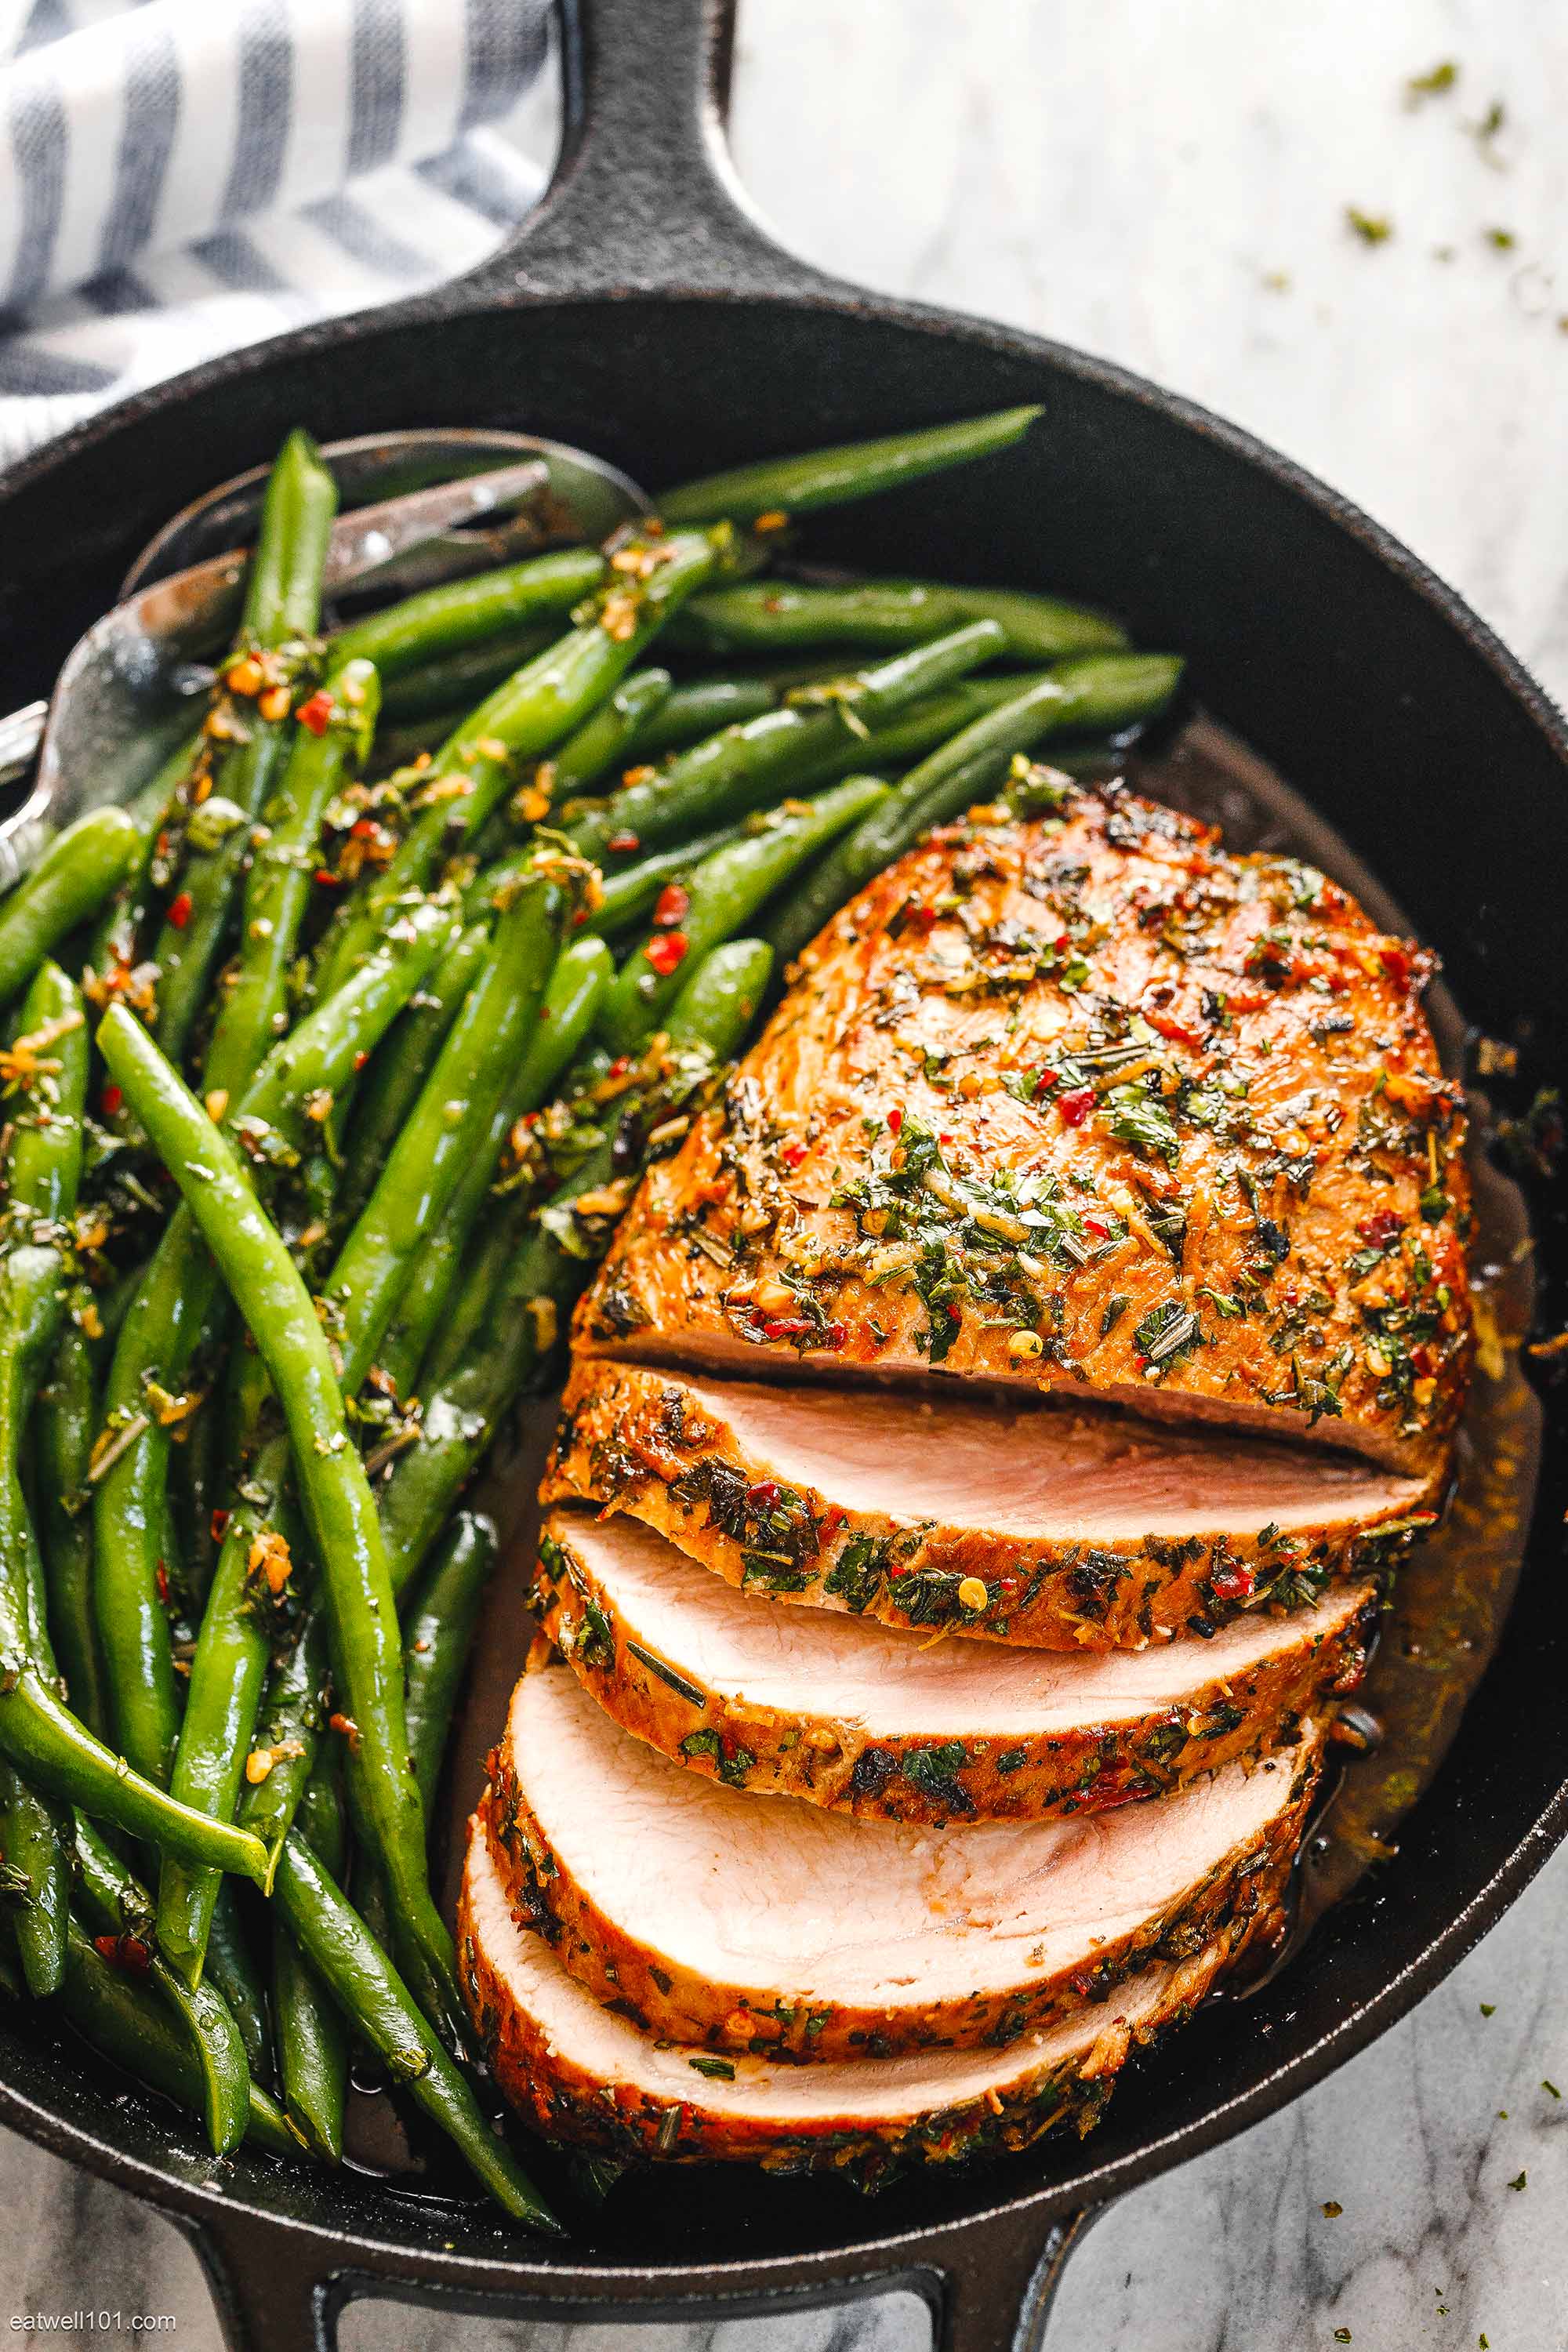 Roasted Pork Loin with Green Beans Recipe